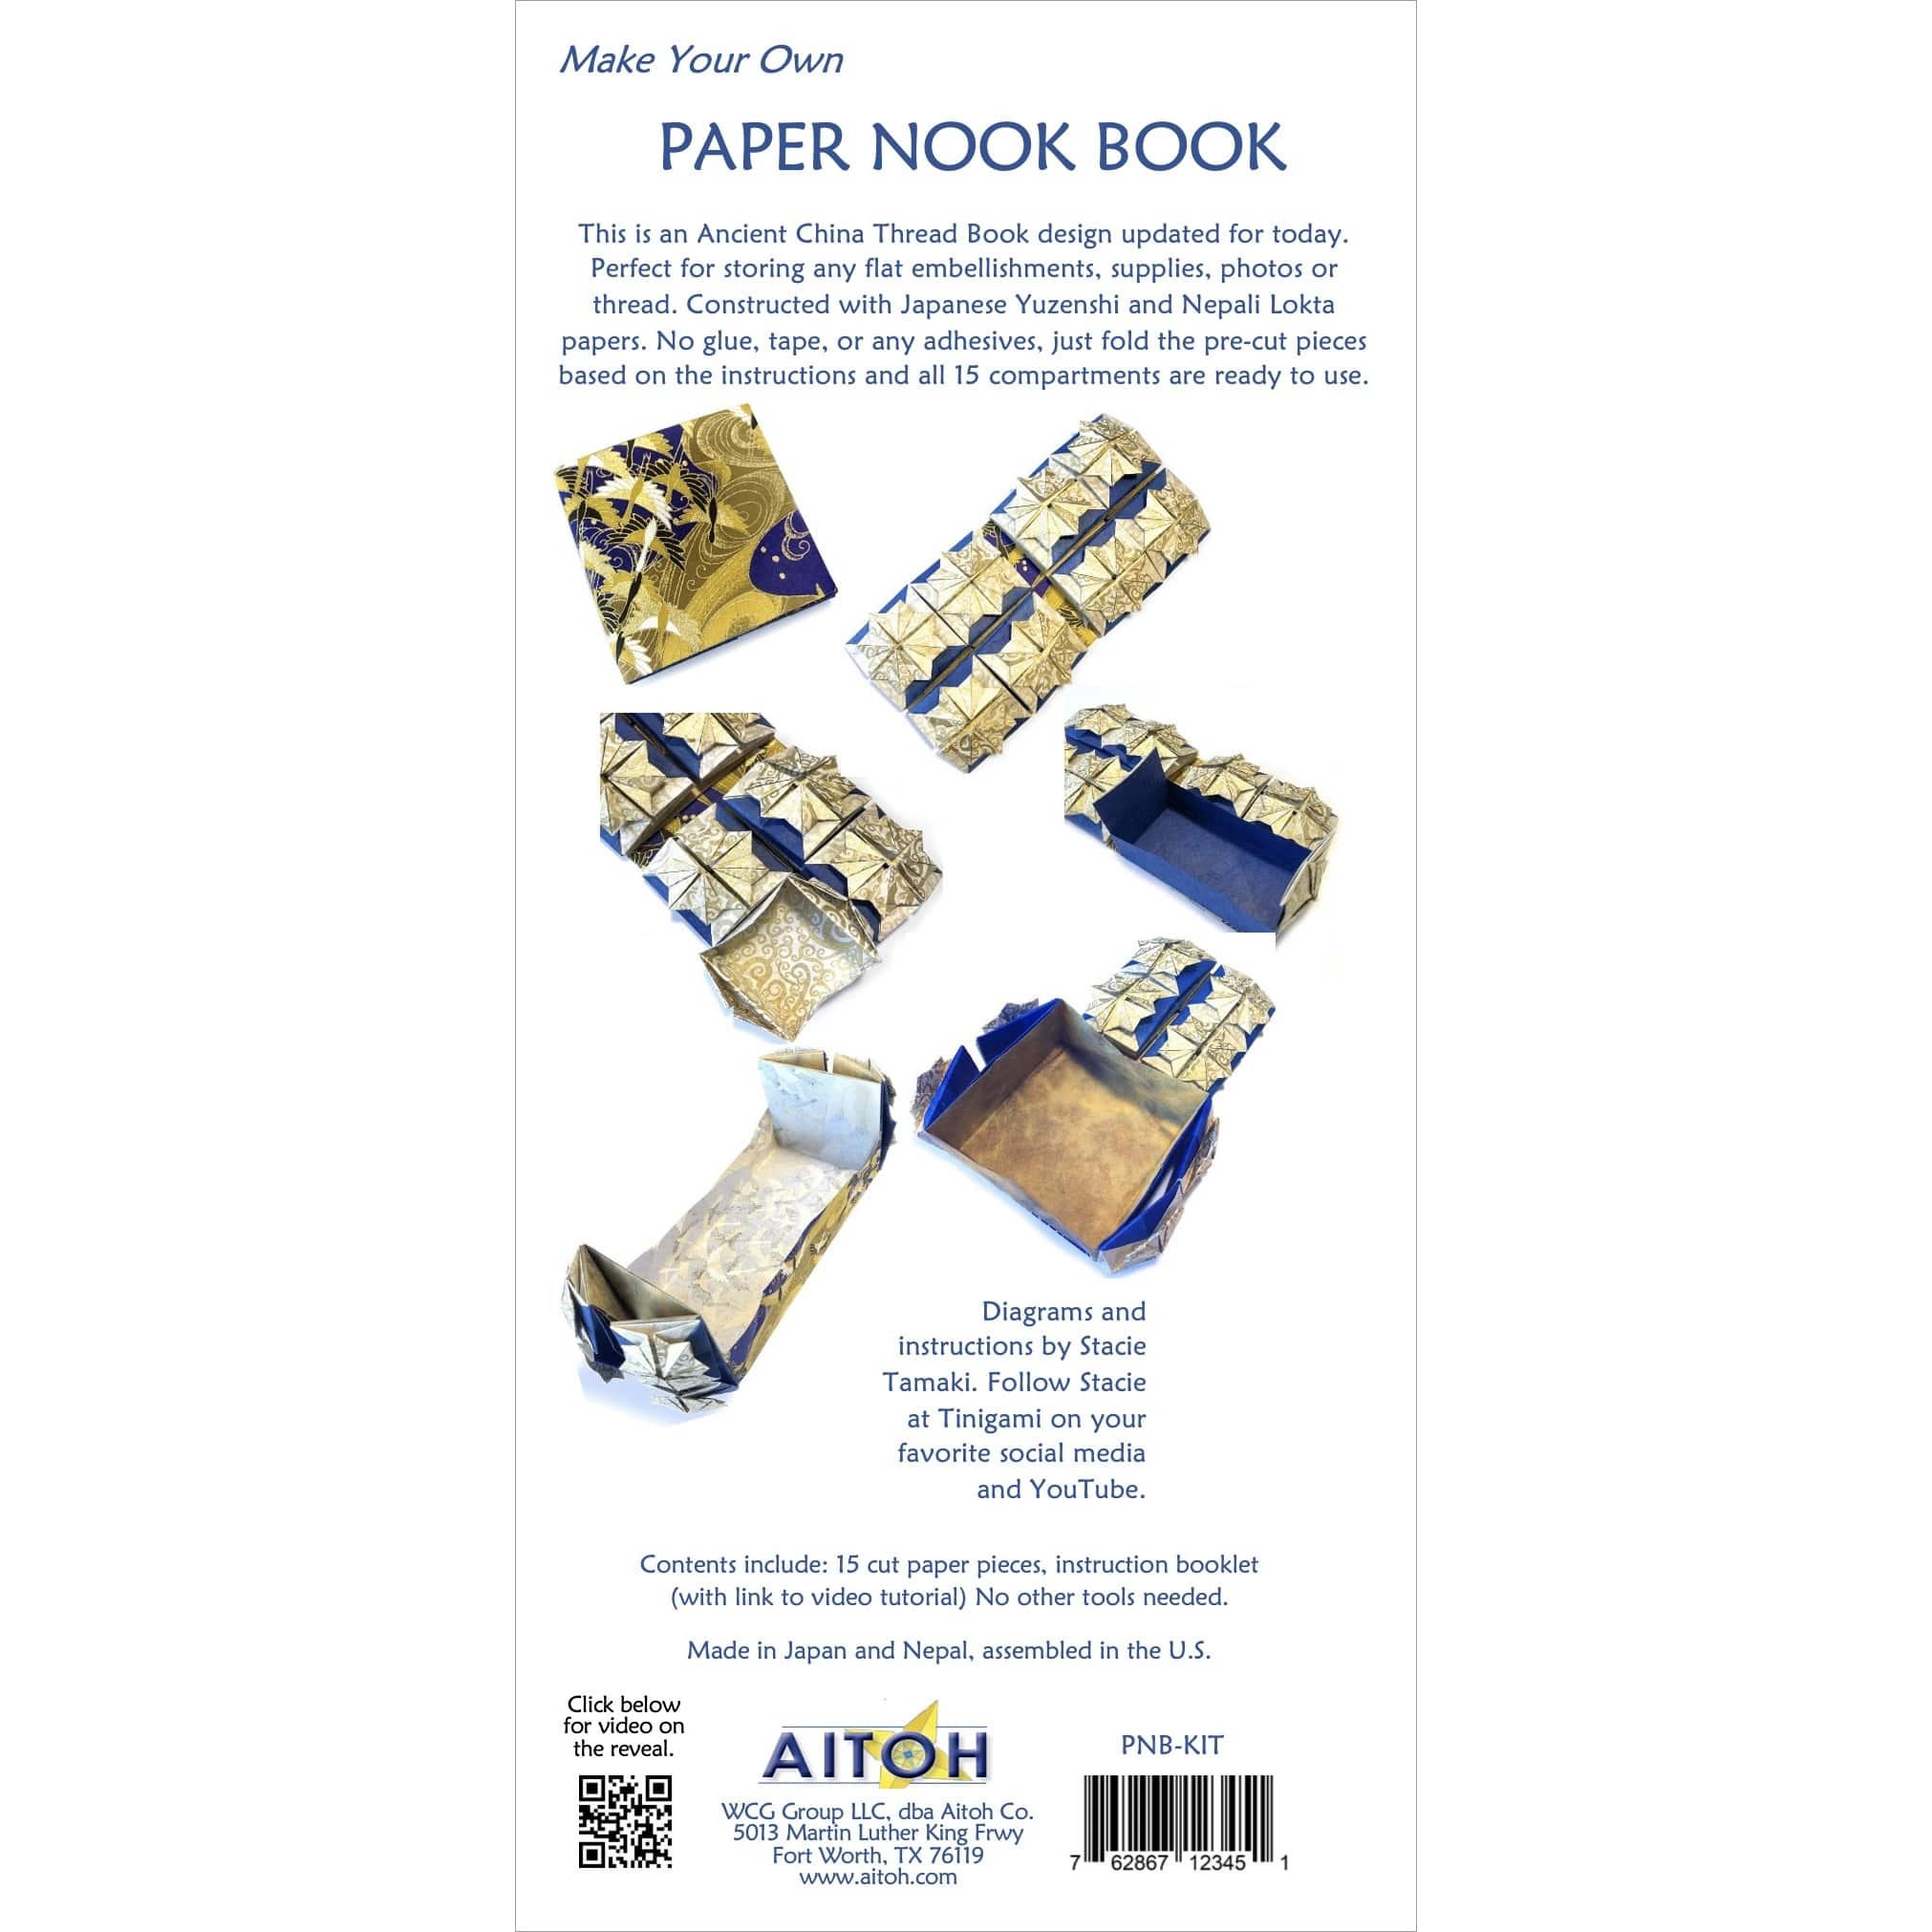 Aitoh Paper Nook Book Kit